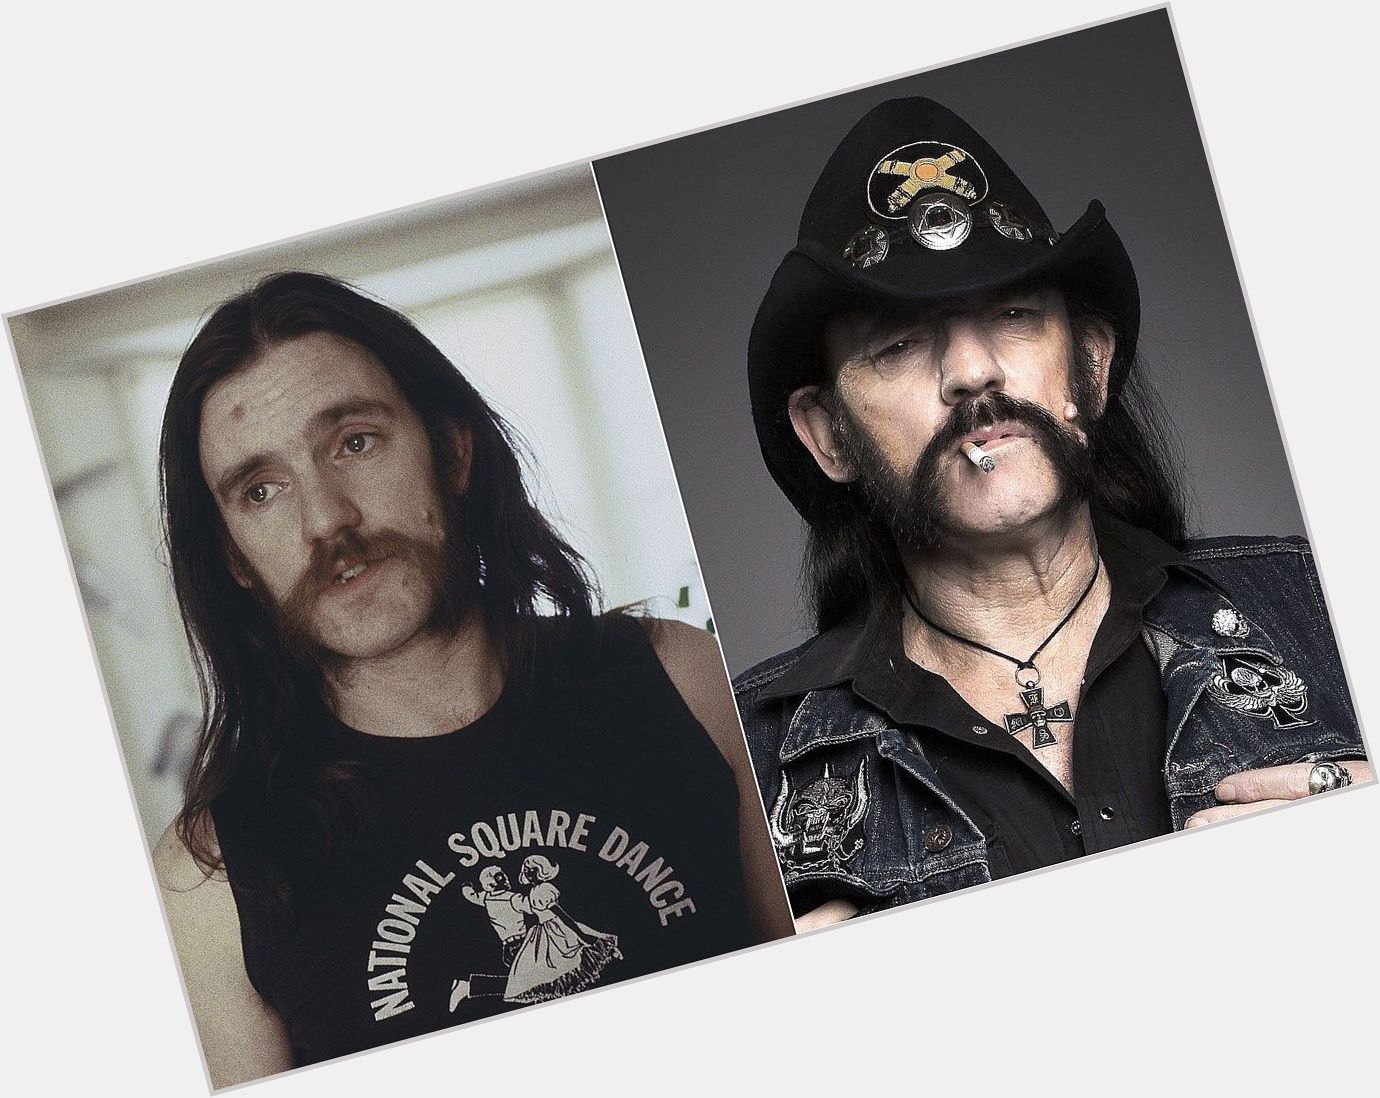 Happy Bday Lemmy :\) wherever you are.

See Photos of Lemmy Kilmister Through the Years  